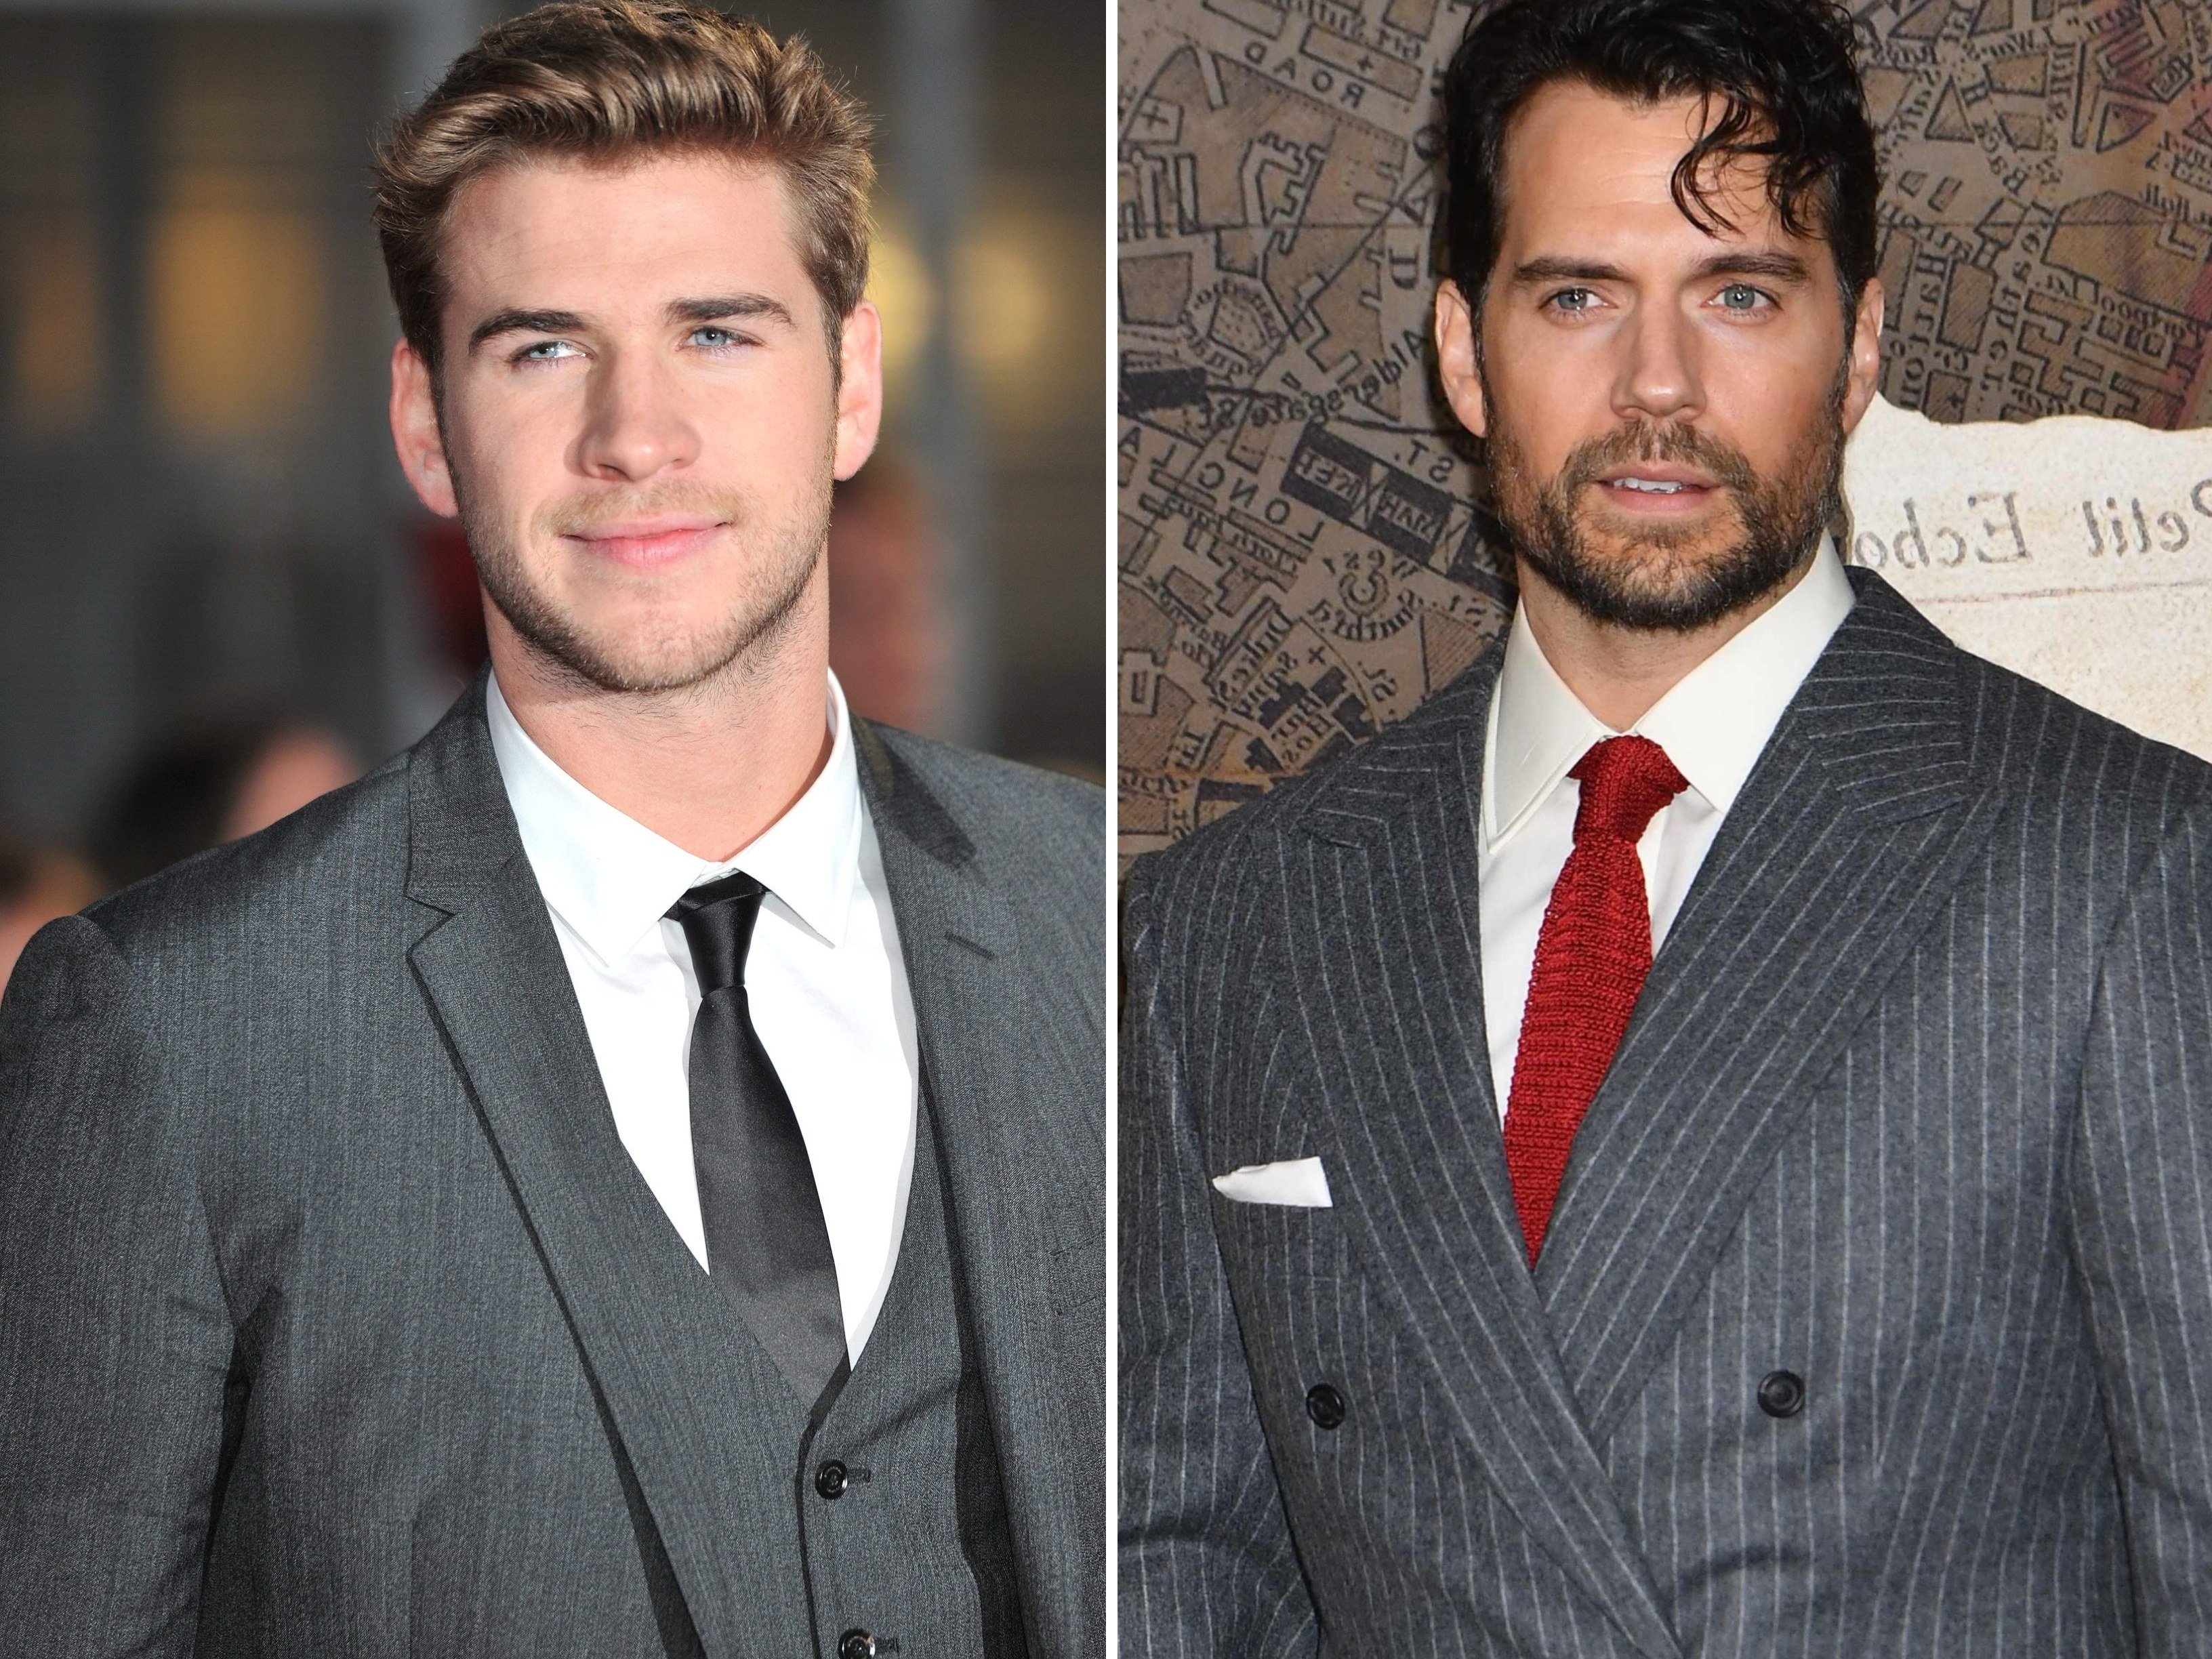 Liam Hemsworth will be replacing Henry Cavill as Geralt of Rivia in season four of The Witcher. Photo: EPA/ AFP